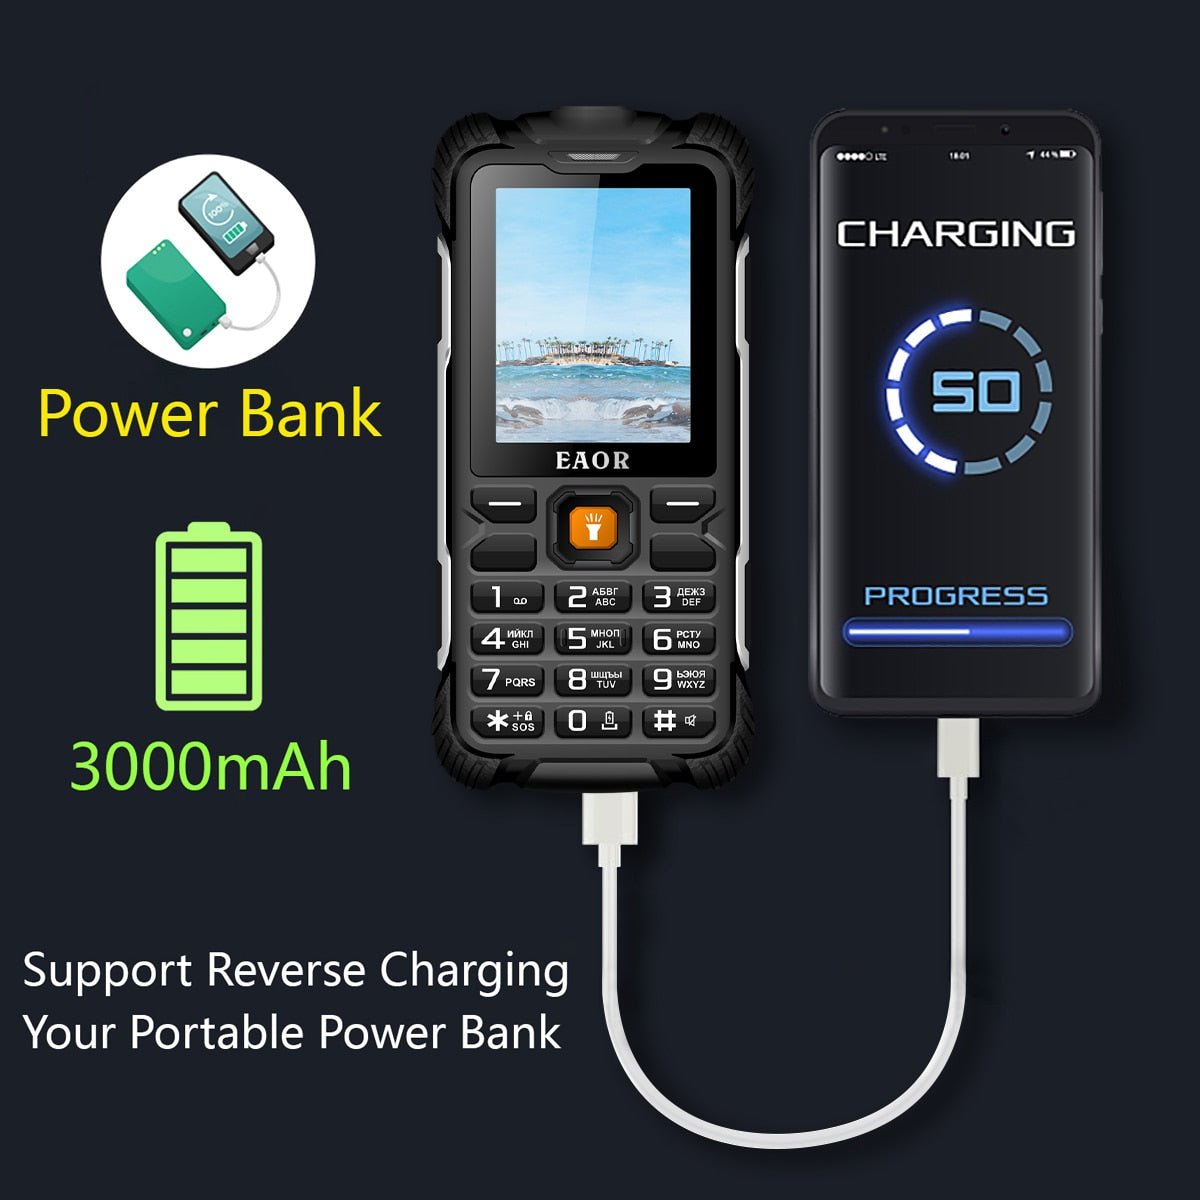 EAOR Outdoor Rugged Phone IP68 Water/Dust-proof Push-Button Phone 3000mAh Power Bank Keypad Phone Feature Phone with Flashlight